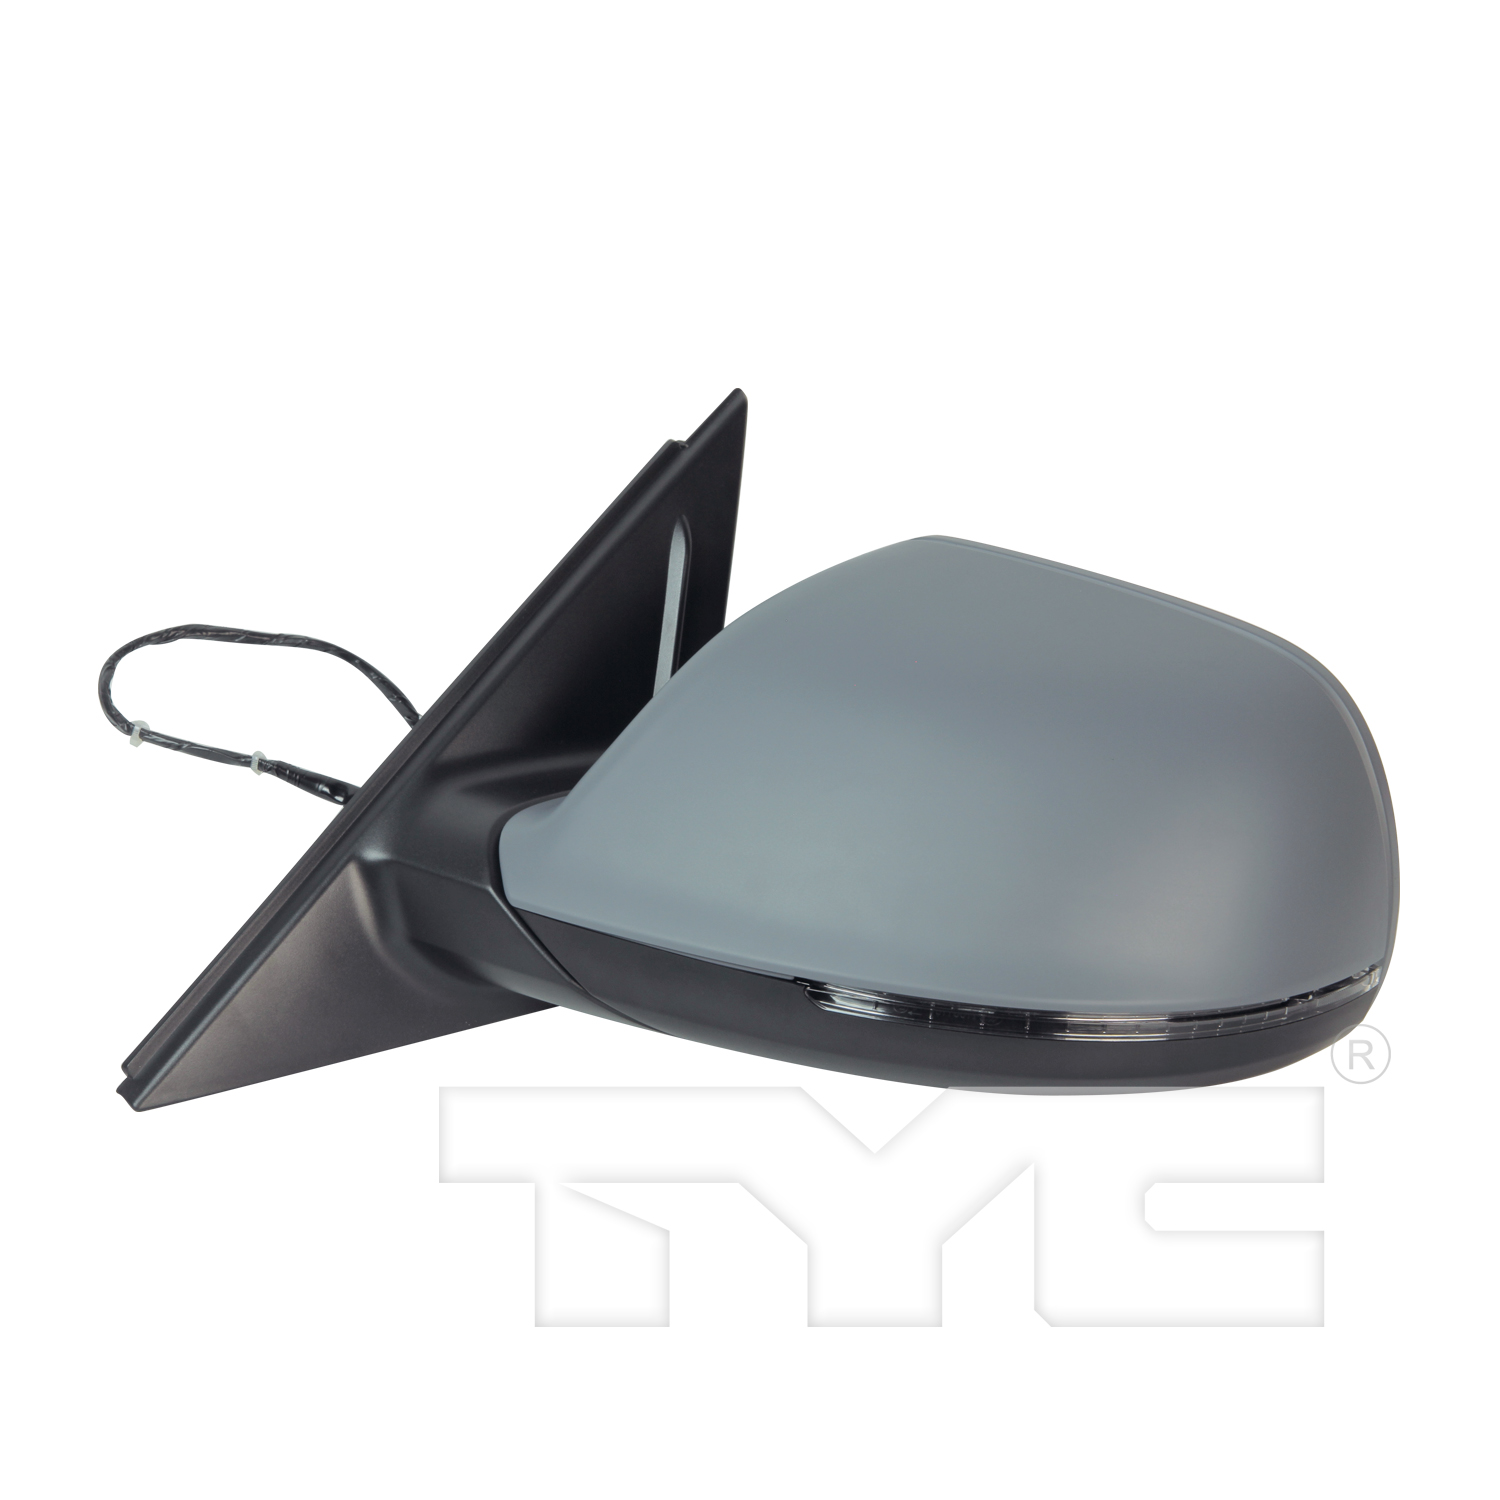 Aftermarket MIRRORS for AUDI - Q5, Q5,09-13,LT Mirror outside rear view